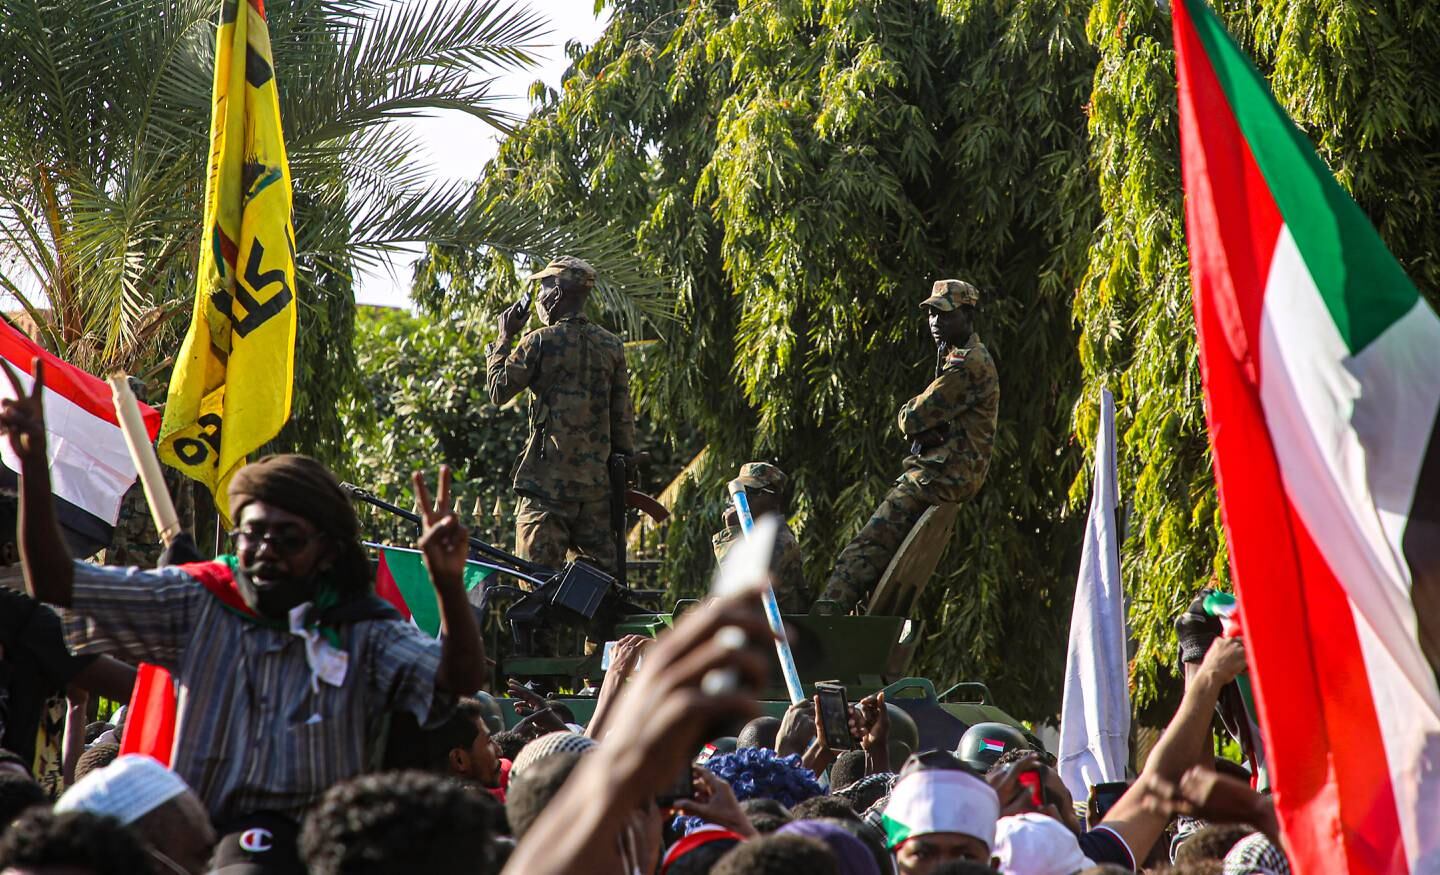 Sudanese security forces guard the Republican Palace in Khartoum after protesters reached it. EPA